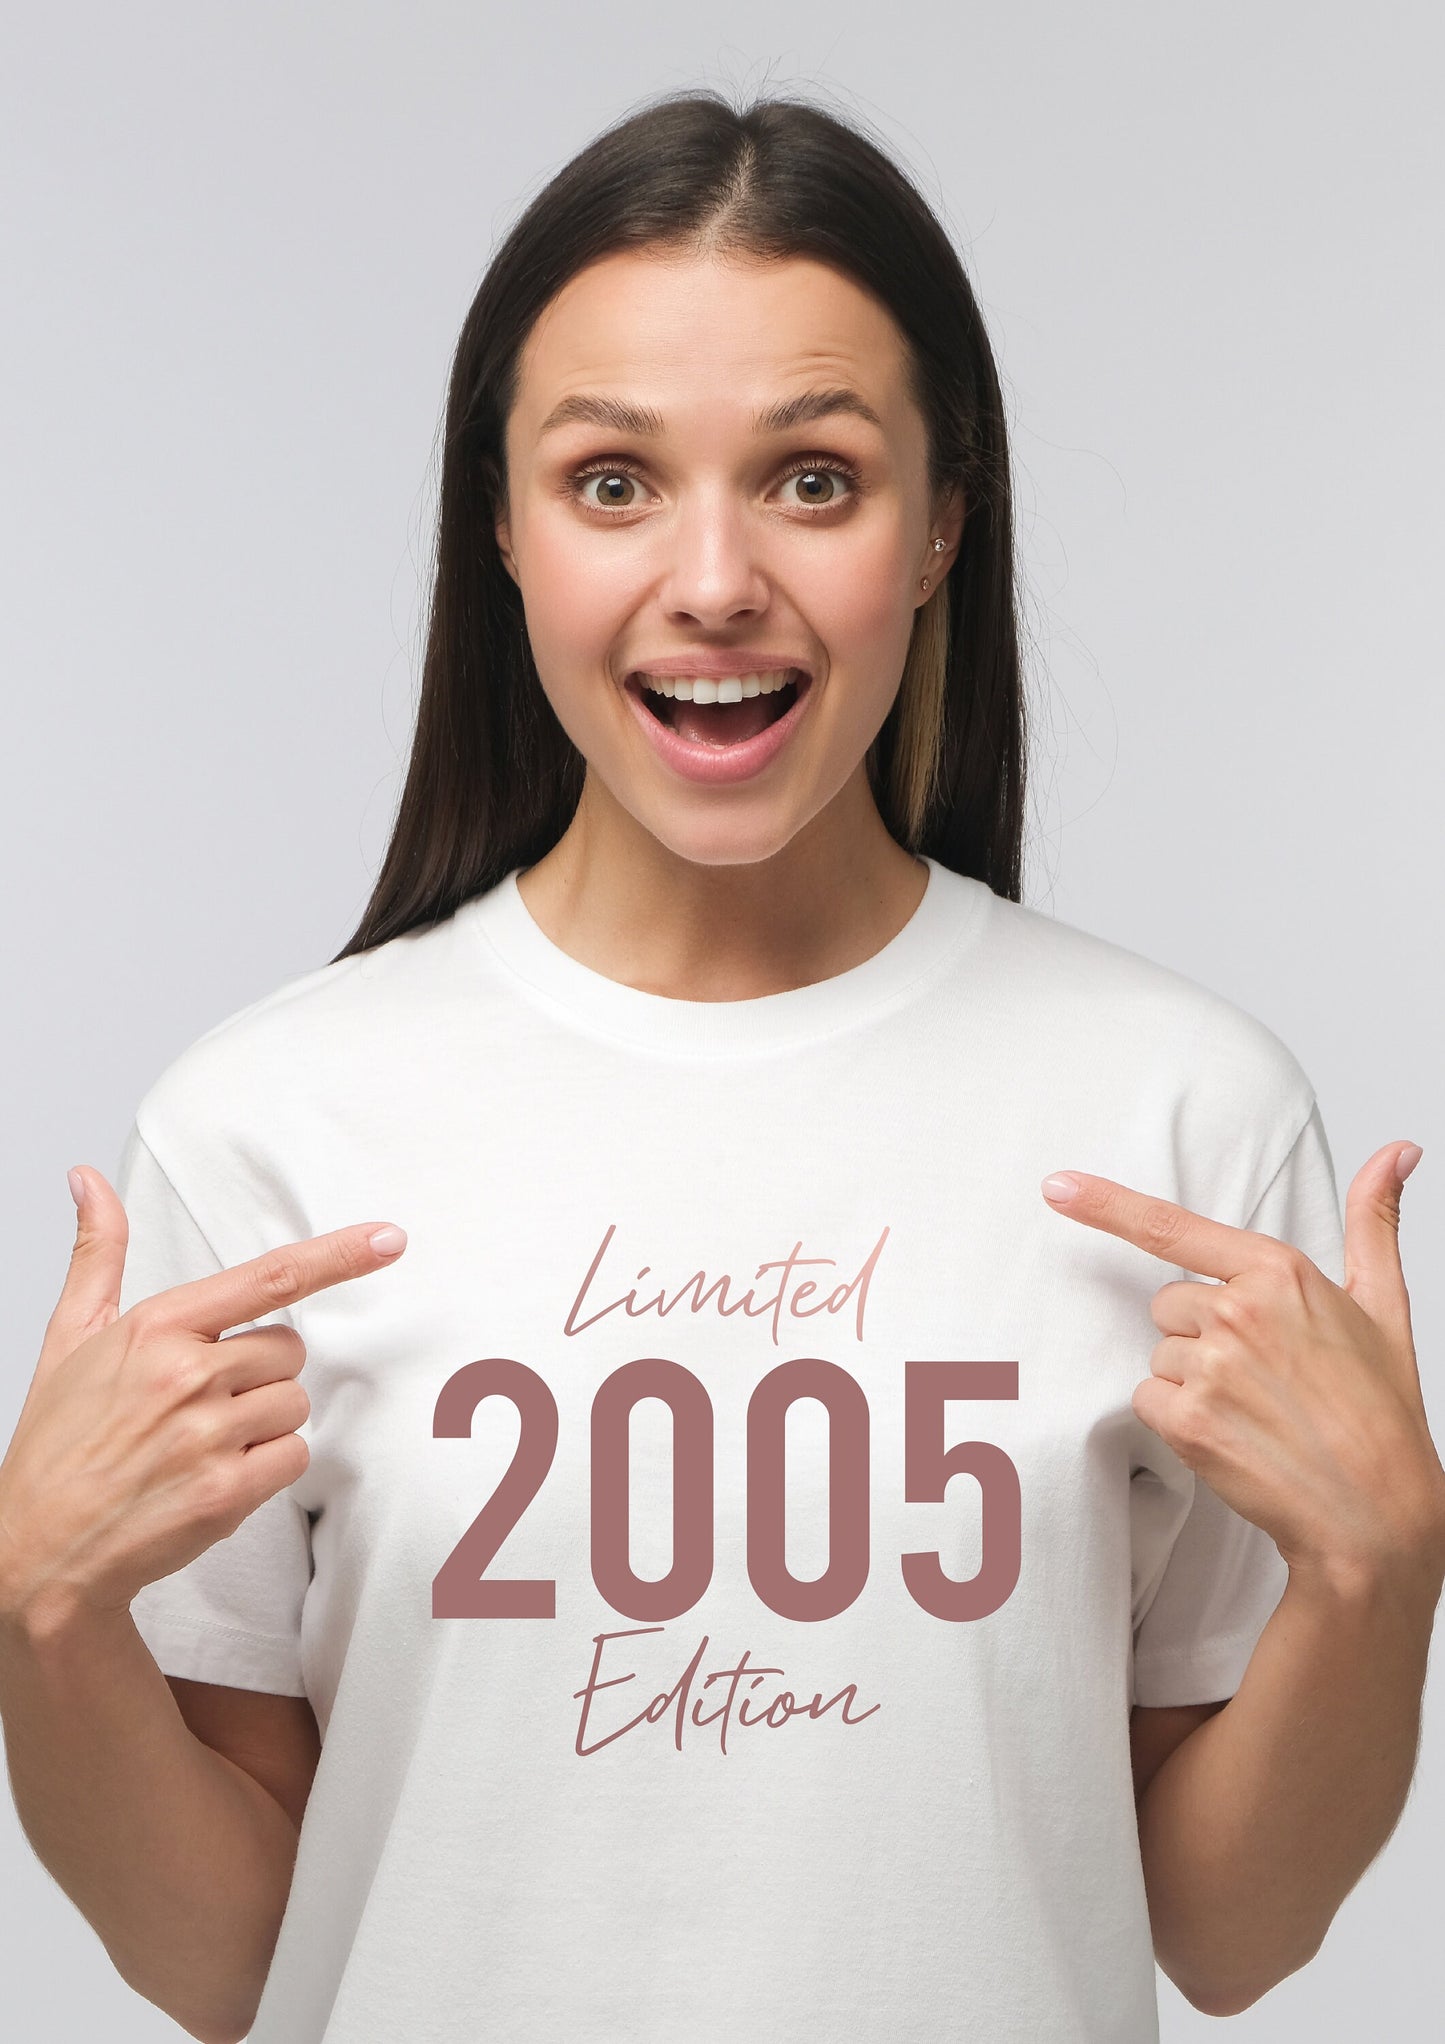 18th Birthday Limited Edition 2005 T-Shirt - ROSE GOLD | 18th Birthday Gift | 18th Tee